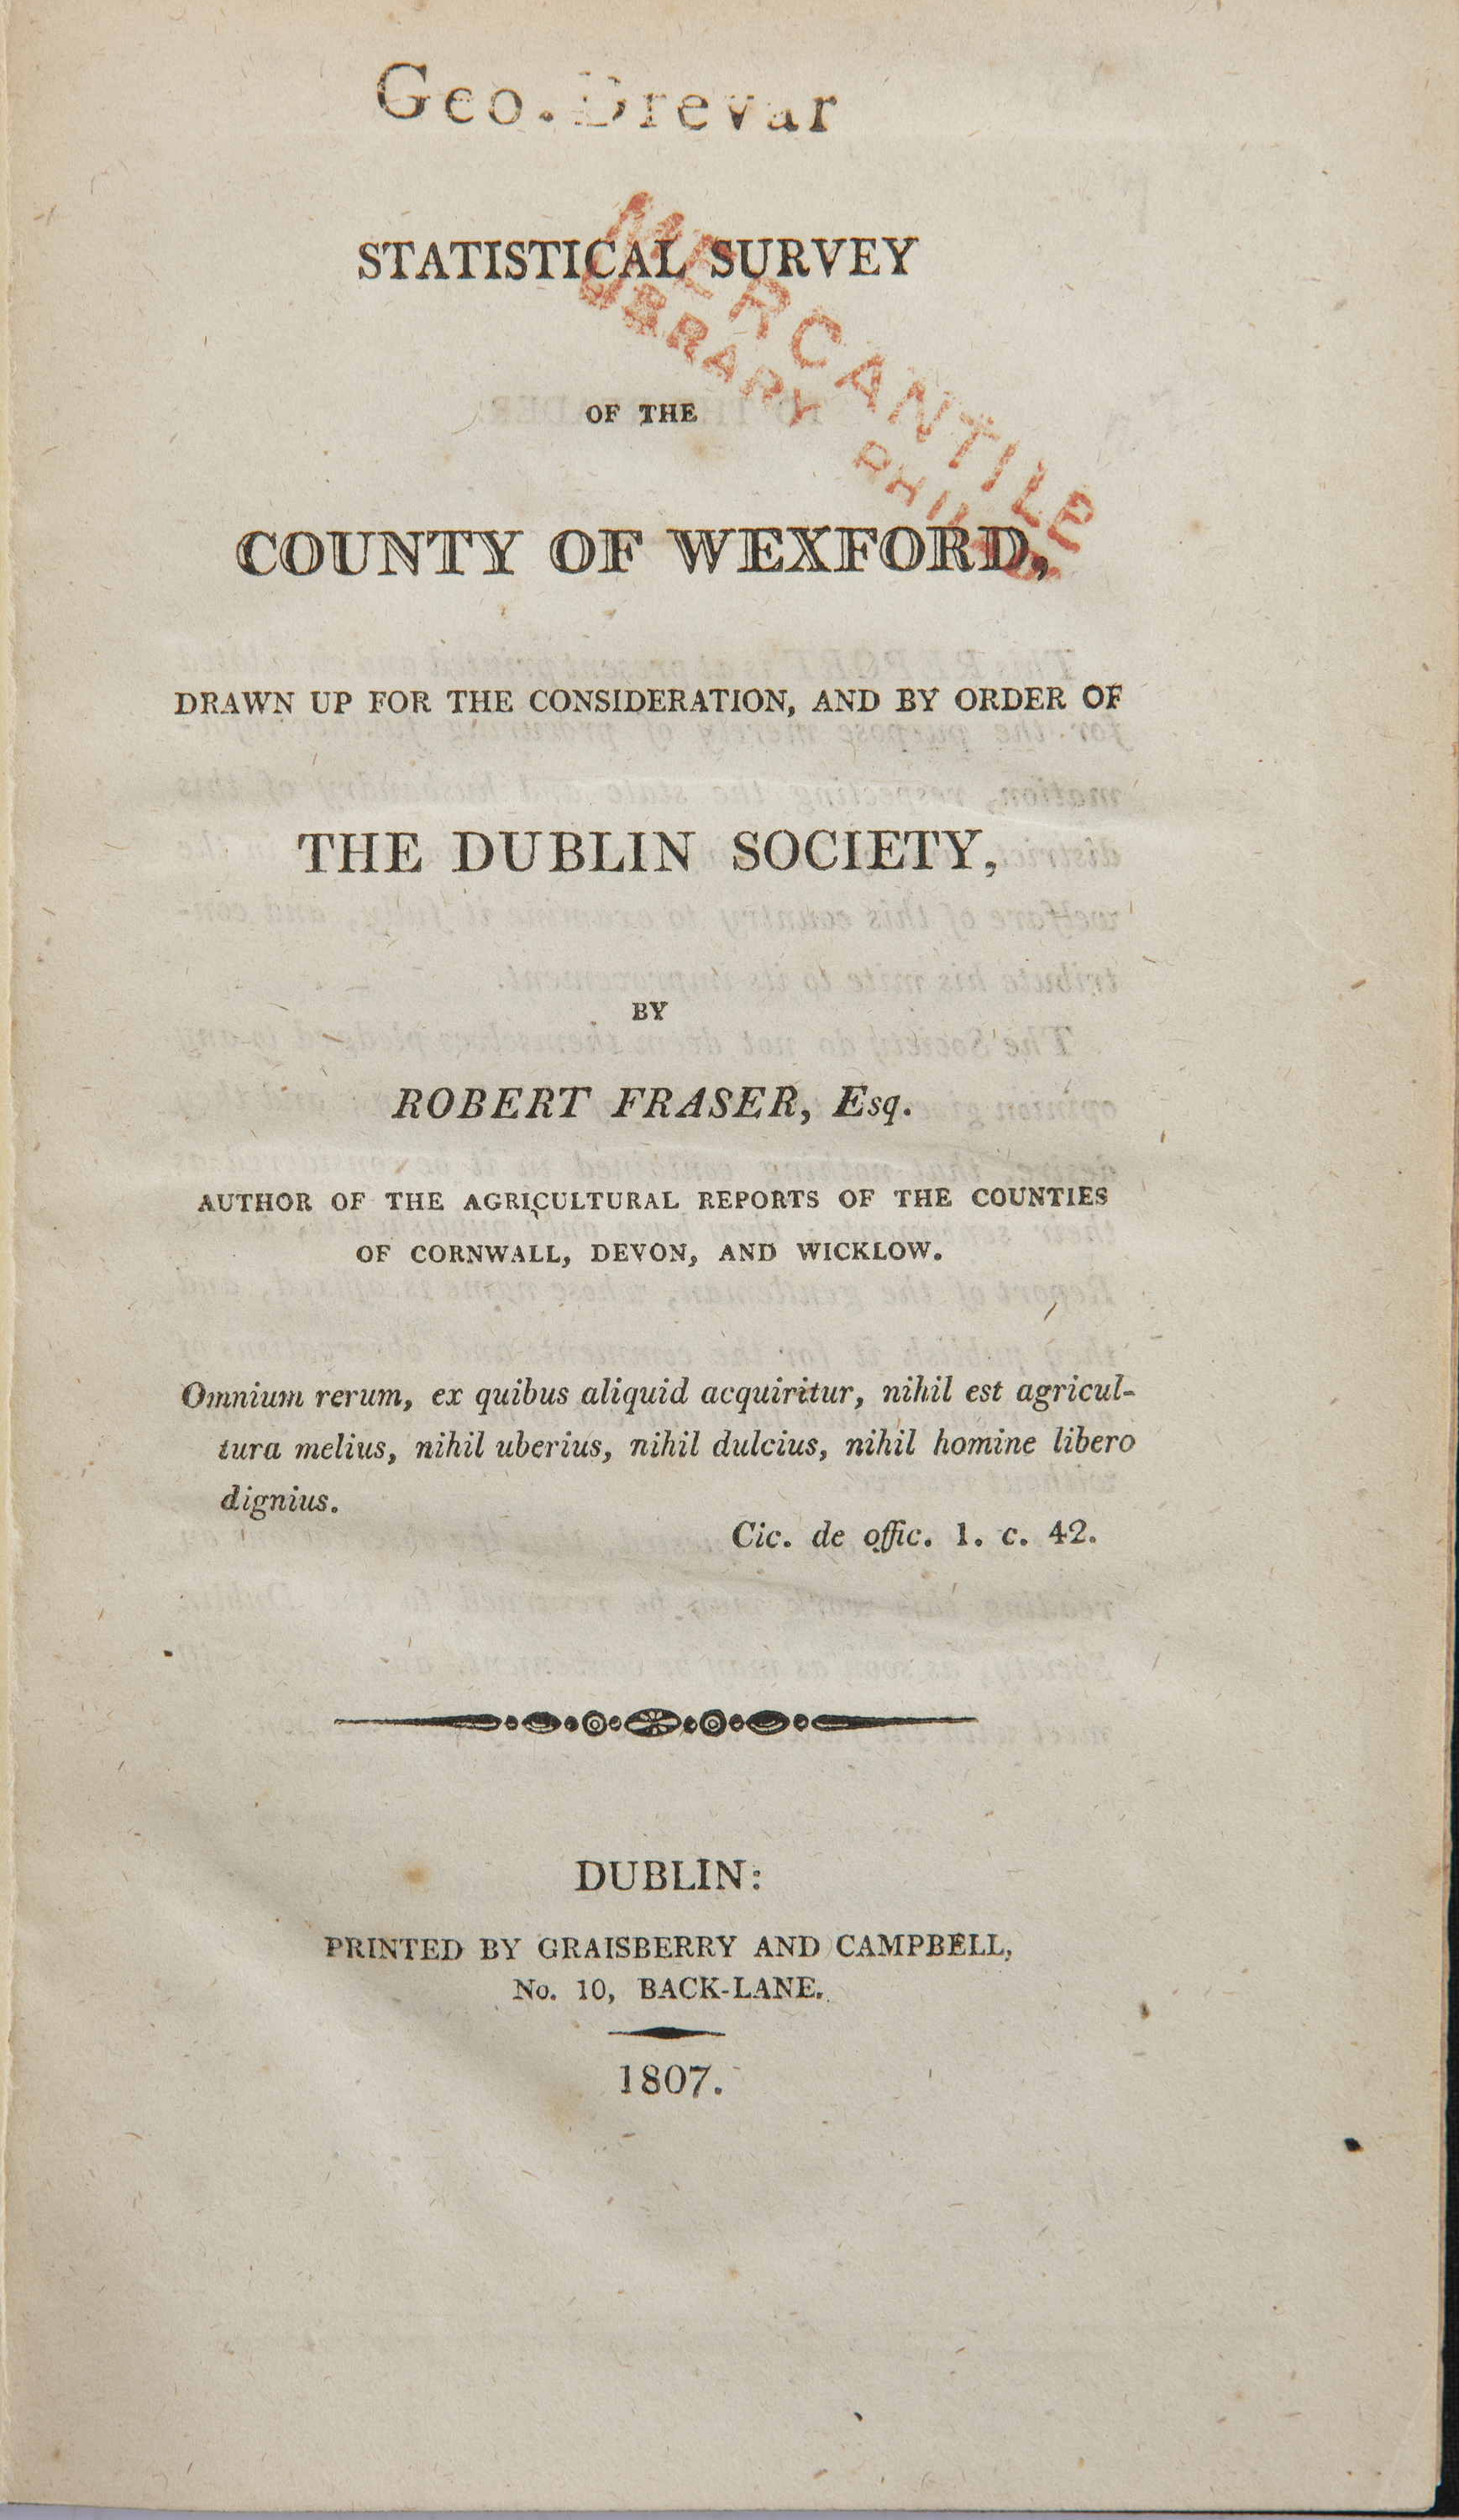 STATISTICAL SURVEY OF THE COUNTY OF WEXFORD, with Observations on the Means of Improvement; drawn up